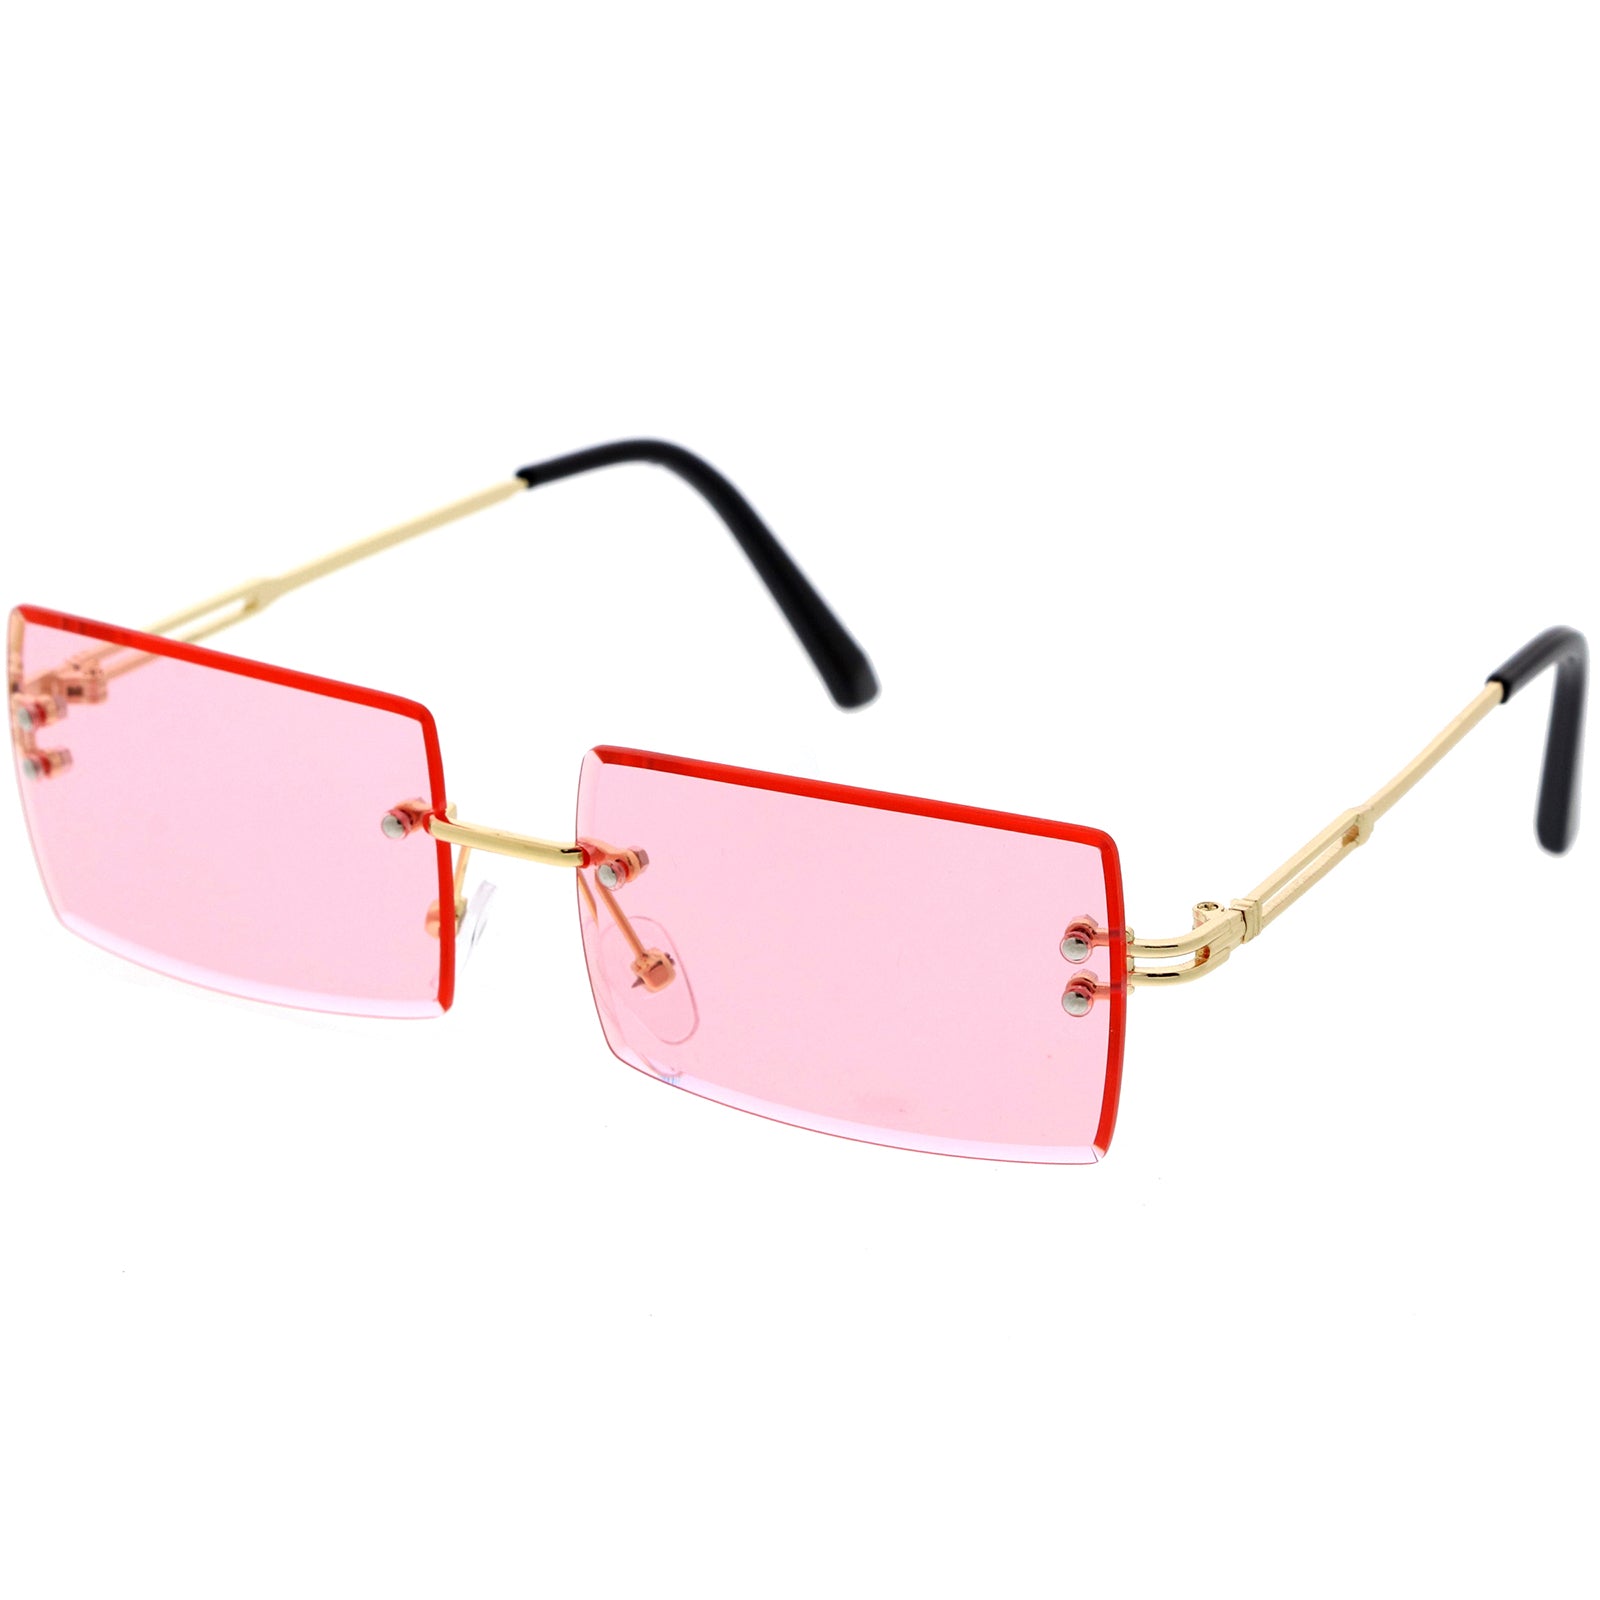 Luxe 90s Inspired Full Rimless Metal Accent Medium Square Sunglasses D108, Gold / Amber | zeroUV